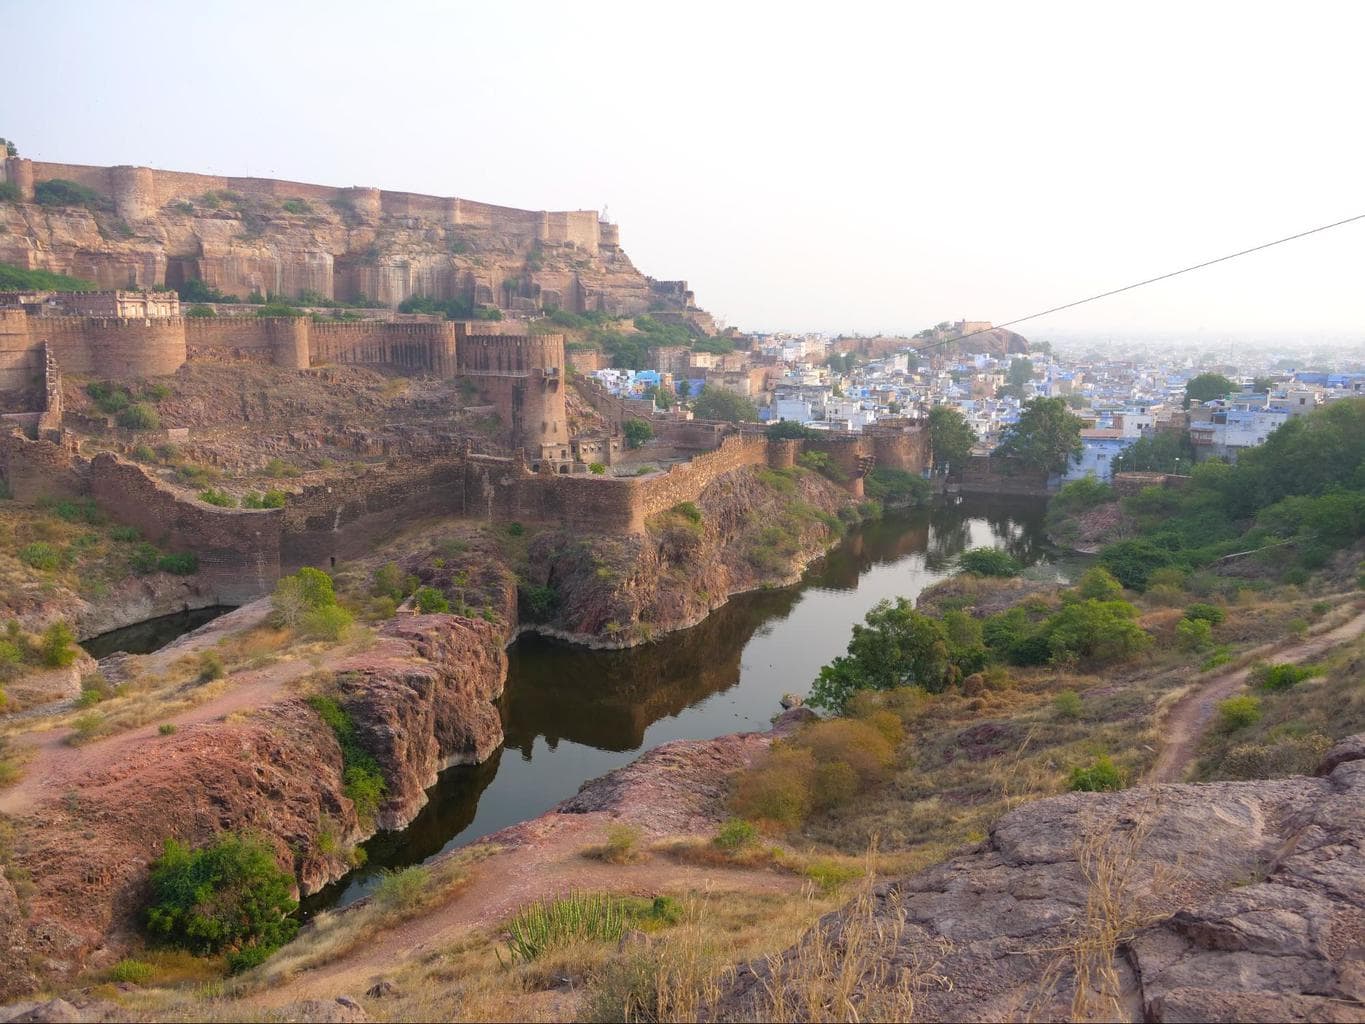 View of Jodhpur’s Fort and Blue City